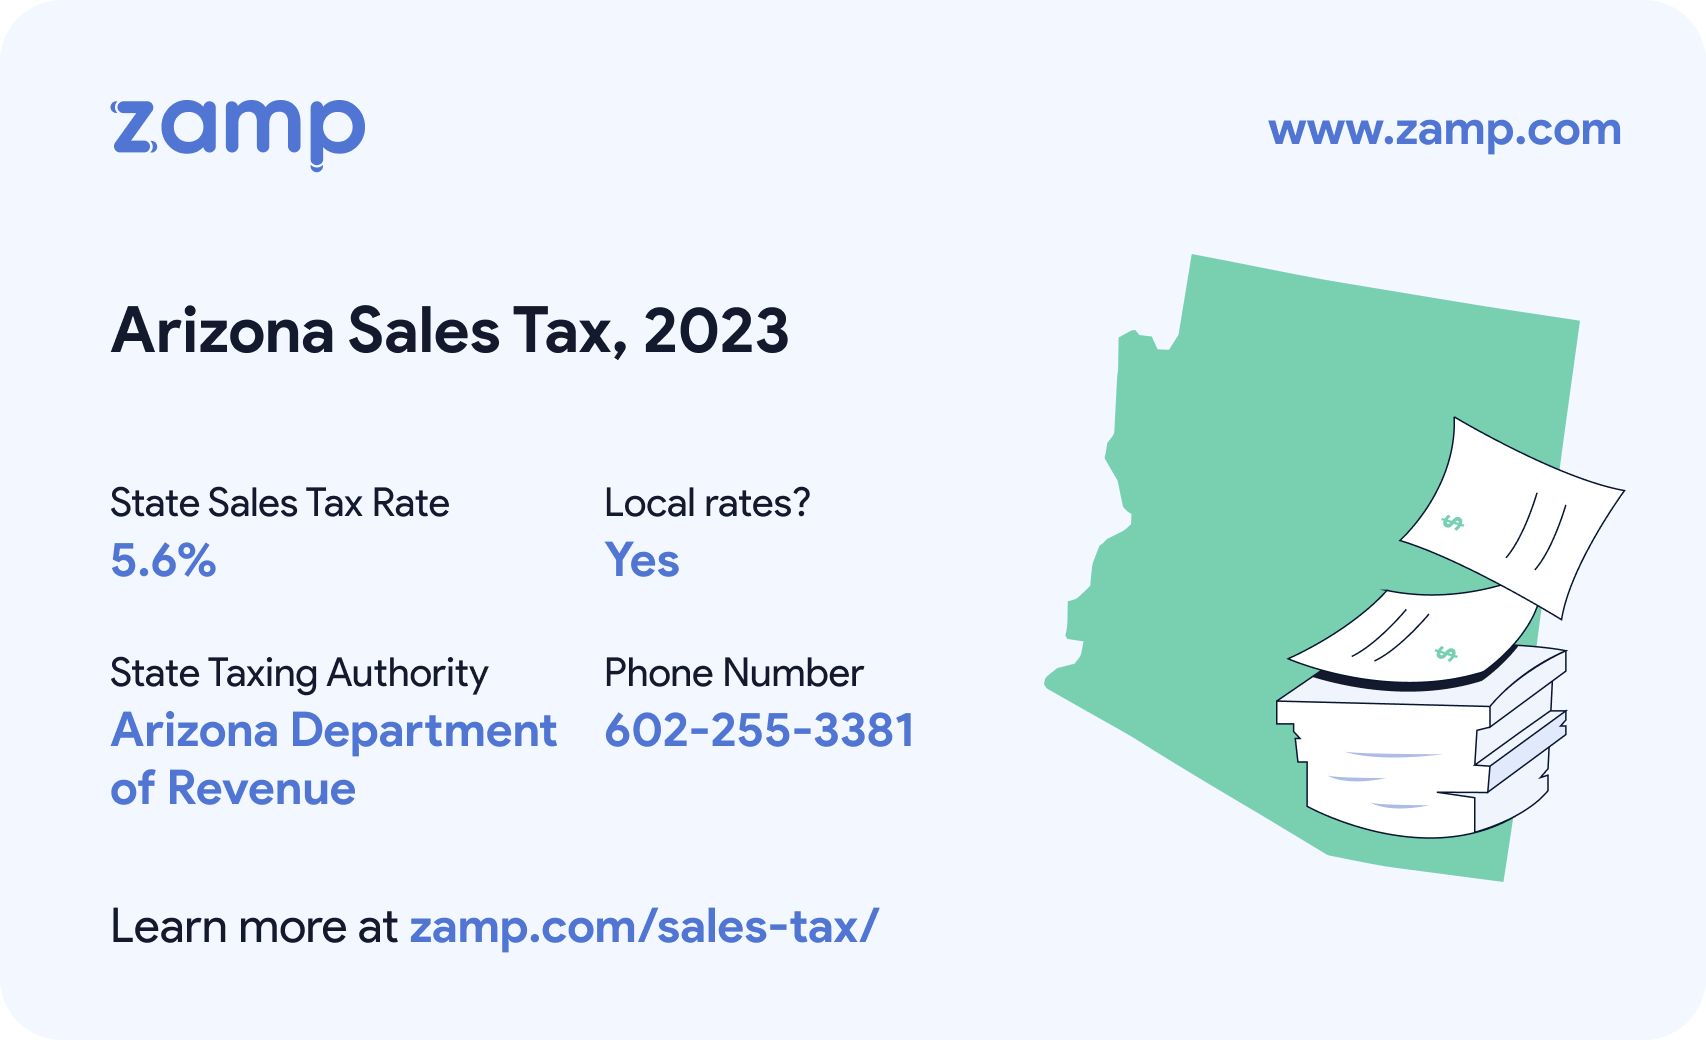 Arizona basic sales tax info for 2023 - State sales tax rate: 5.6%, Local rates? Yes; State Taxing Authority: Arizona Department of Revenue; and phone number 602-255-3381